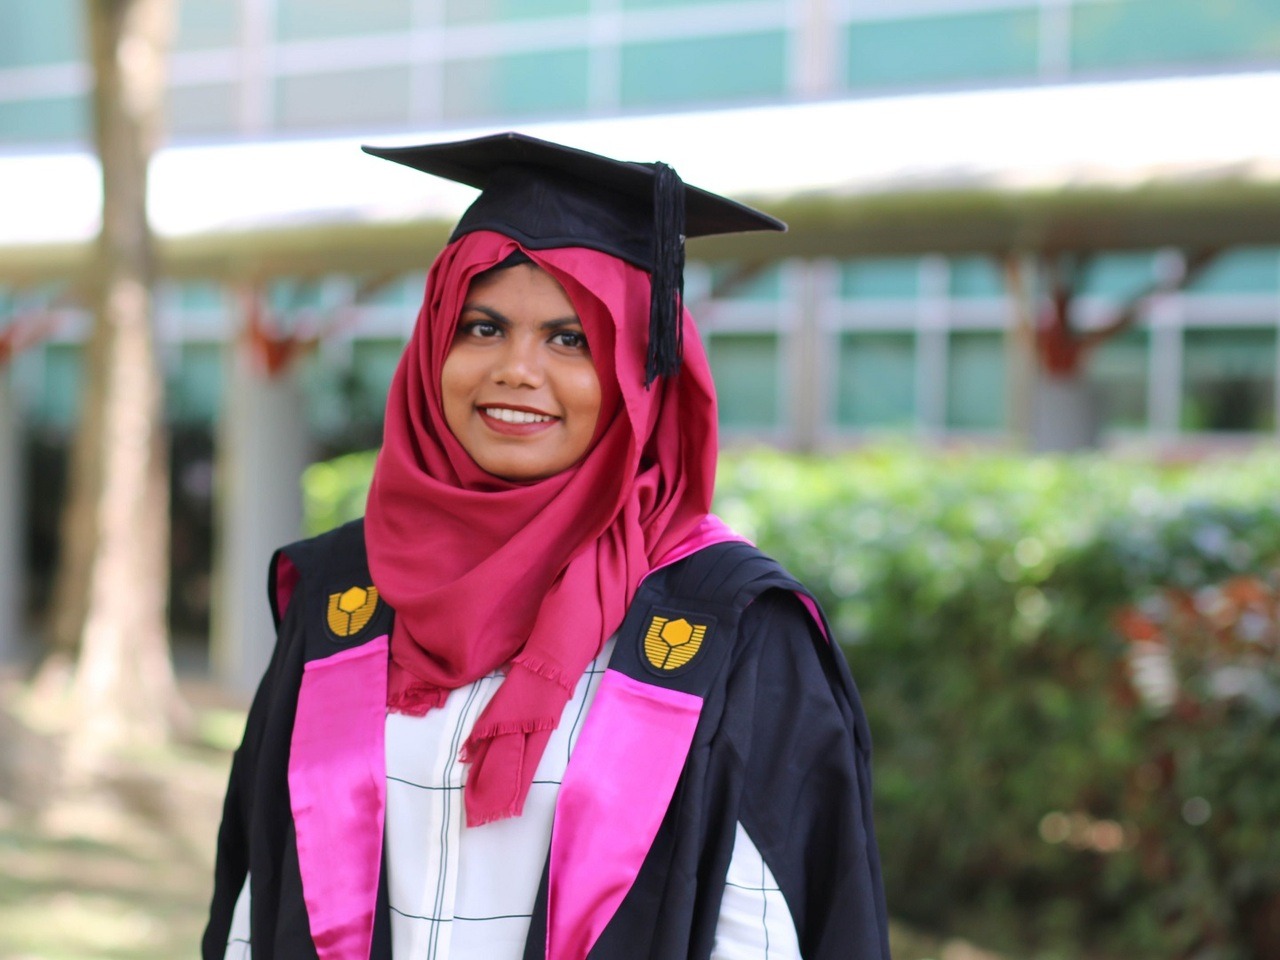 “My initial university experience was an emotional roller-coaster. Coping with a new life away from home in Maldives was challenging. Thanks to the diverse and very inclusive campus community, the amazing lecturers and all the great friends I’ve made...